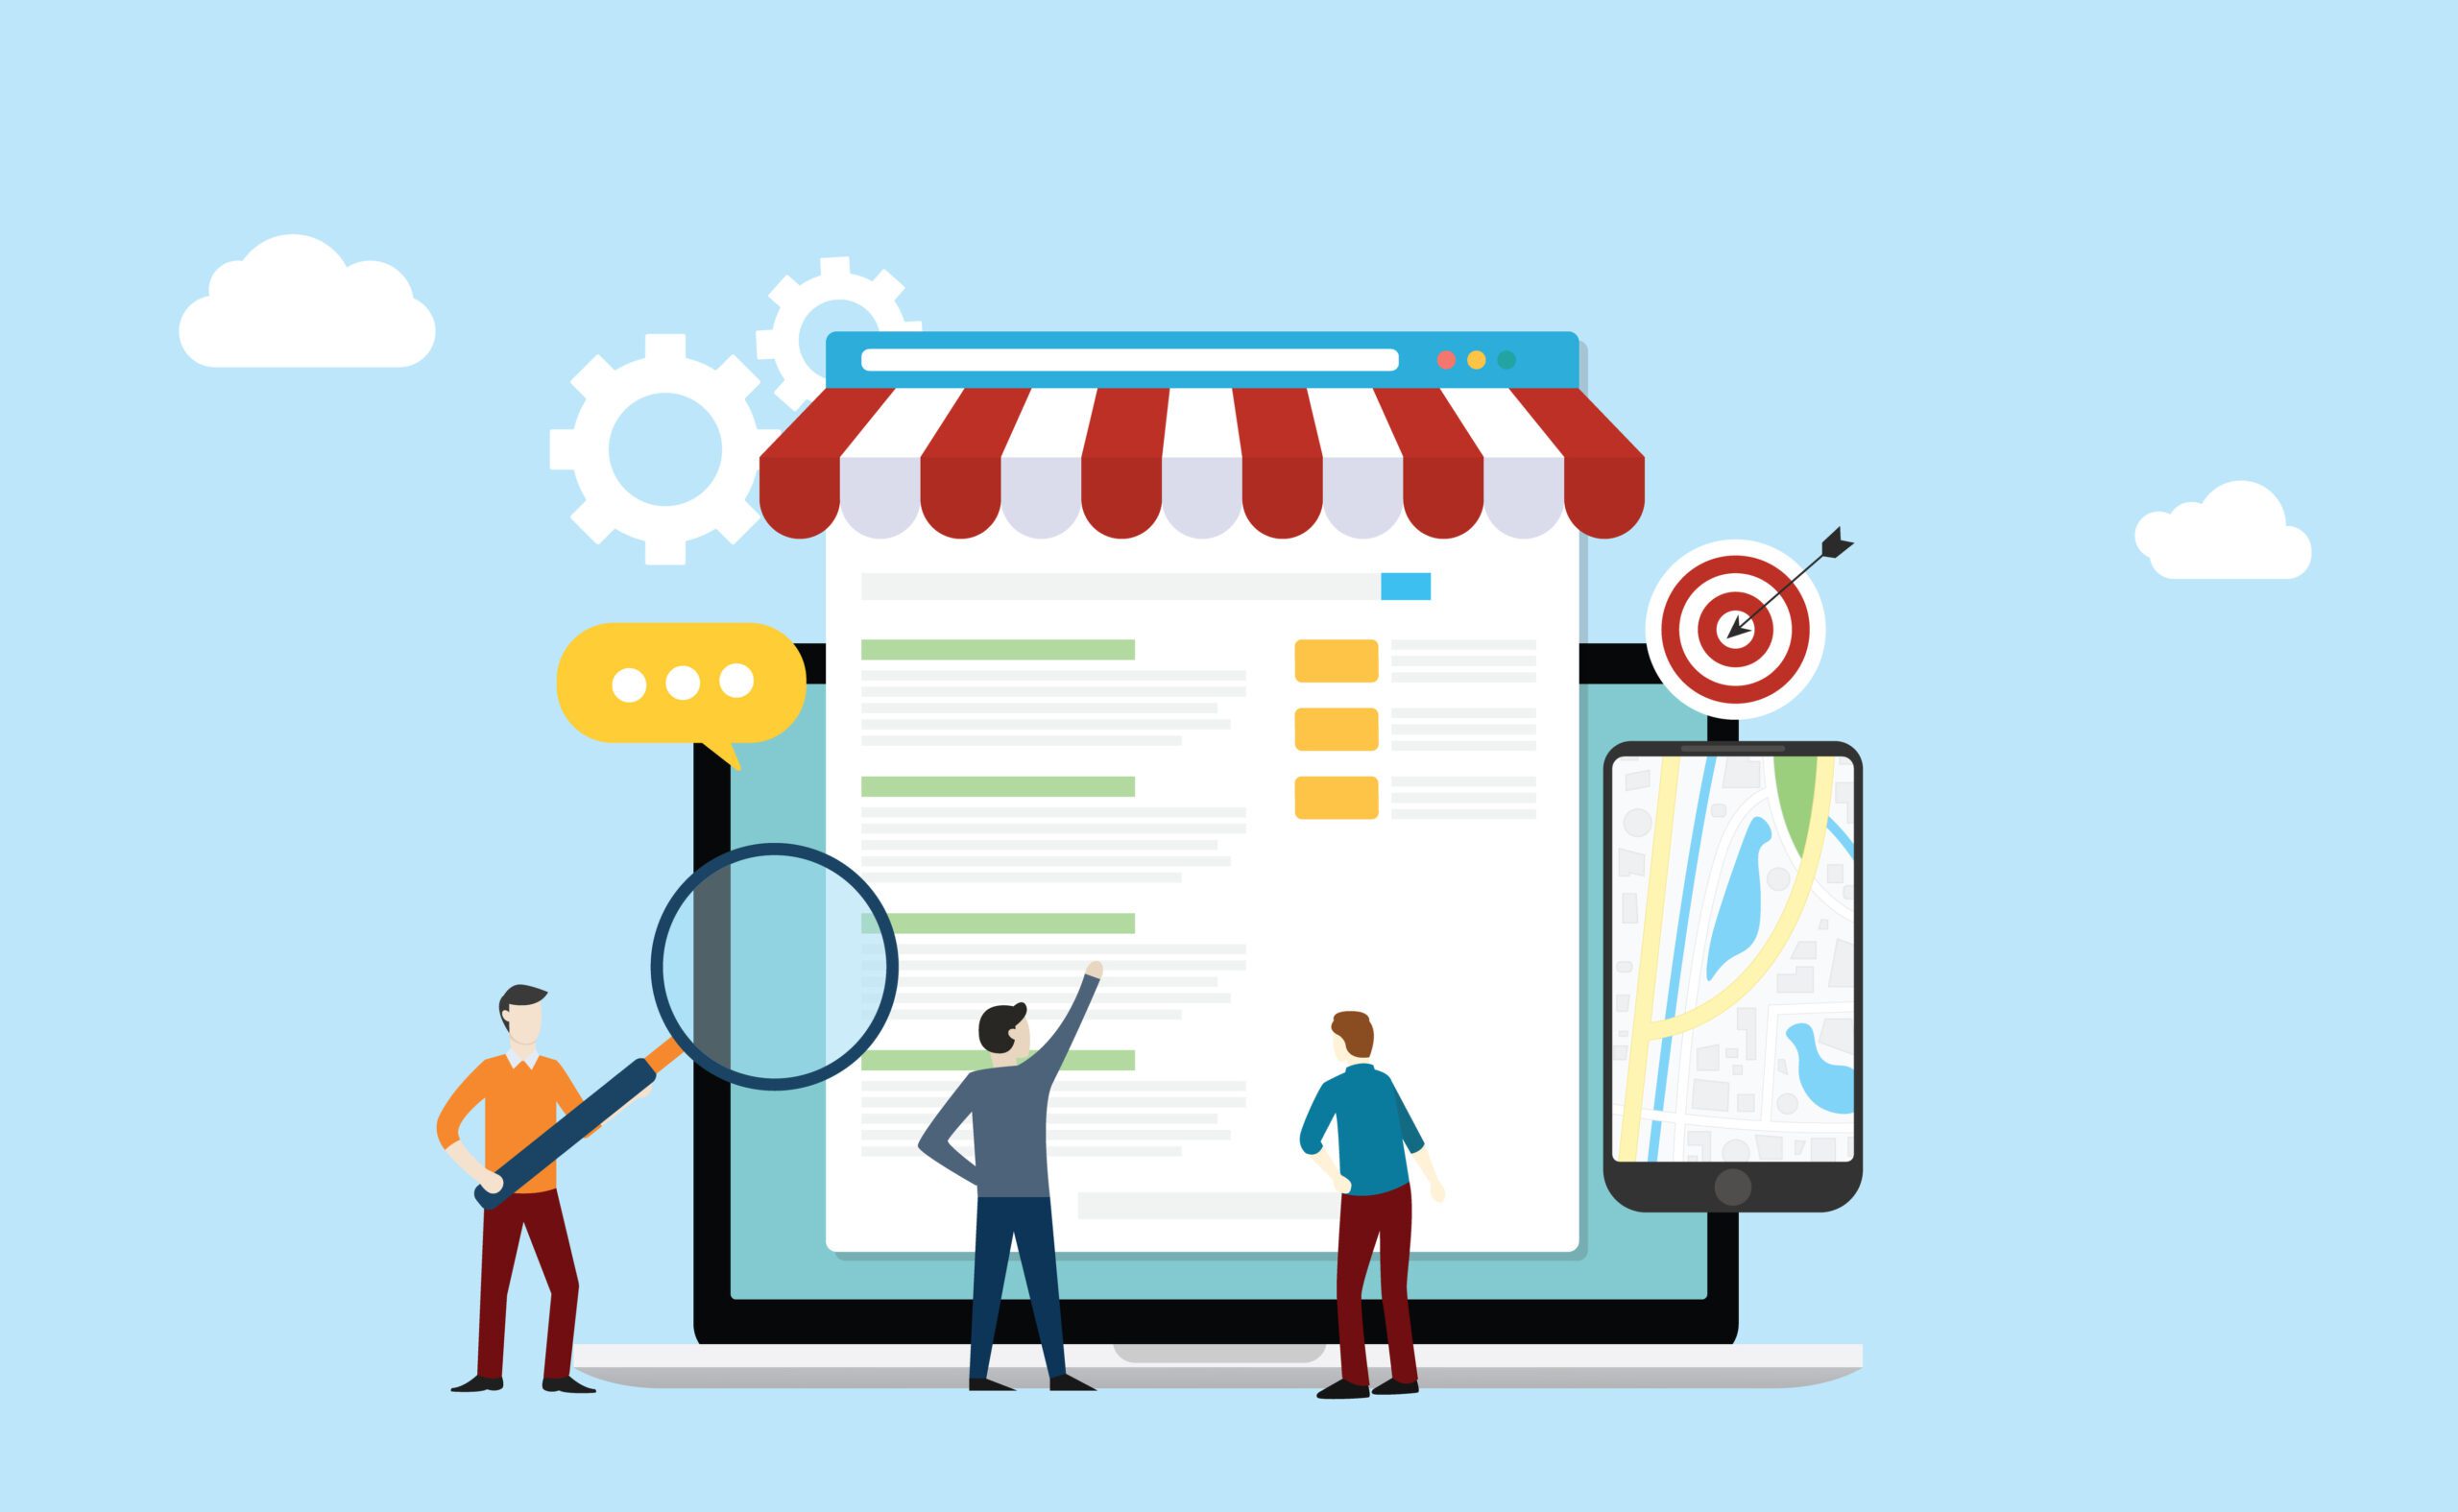 local seo market strategy business search engine optimization with team people working together on front of store and maps online - vector illustration